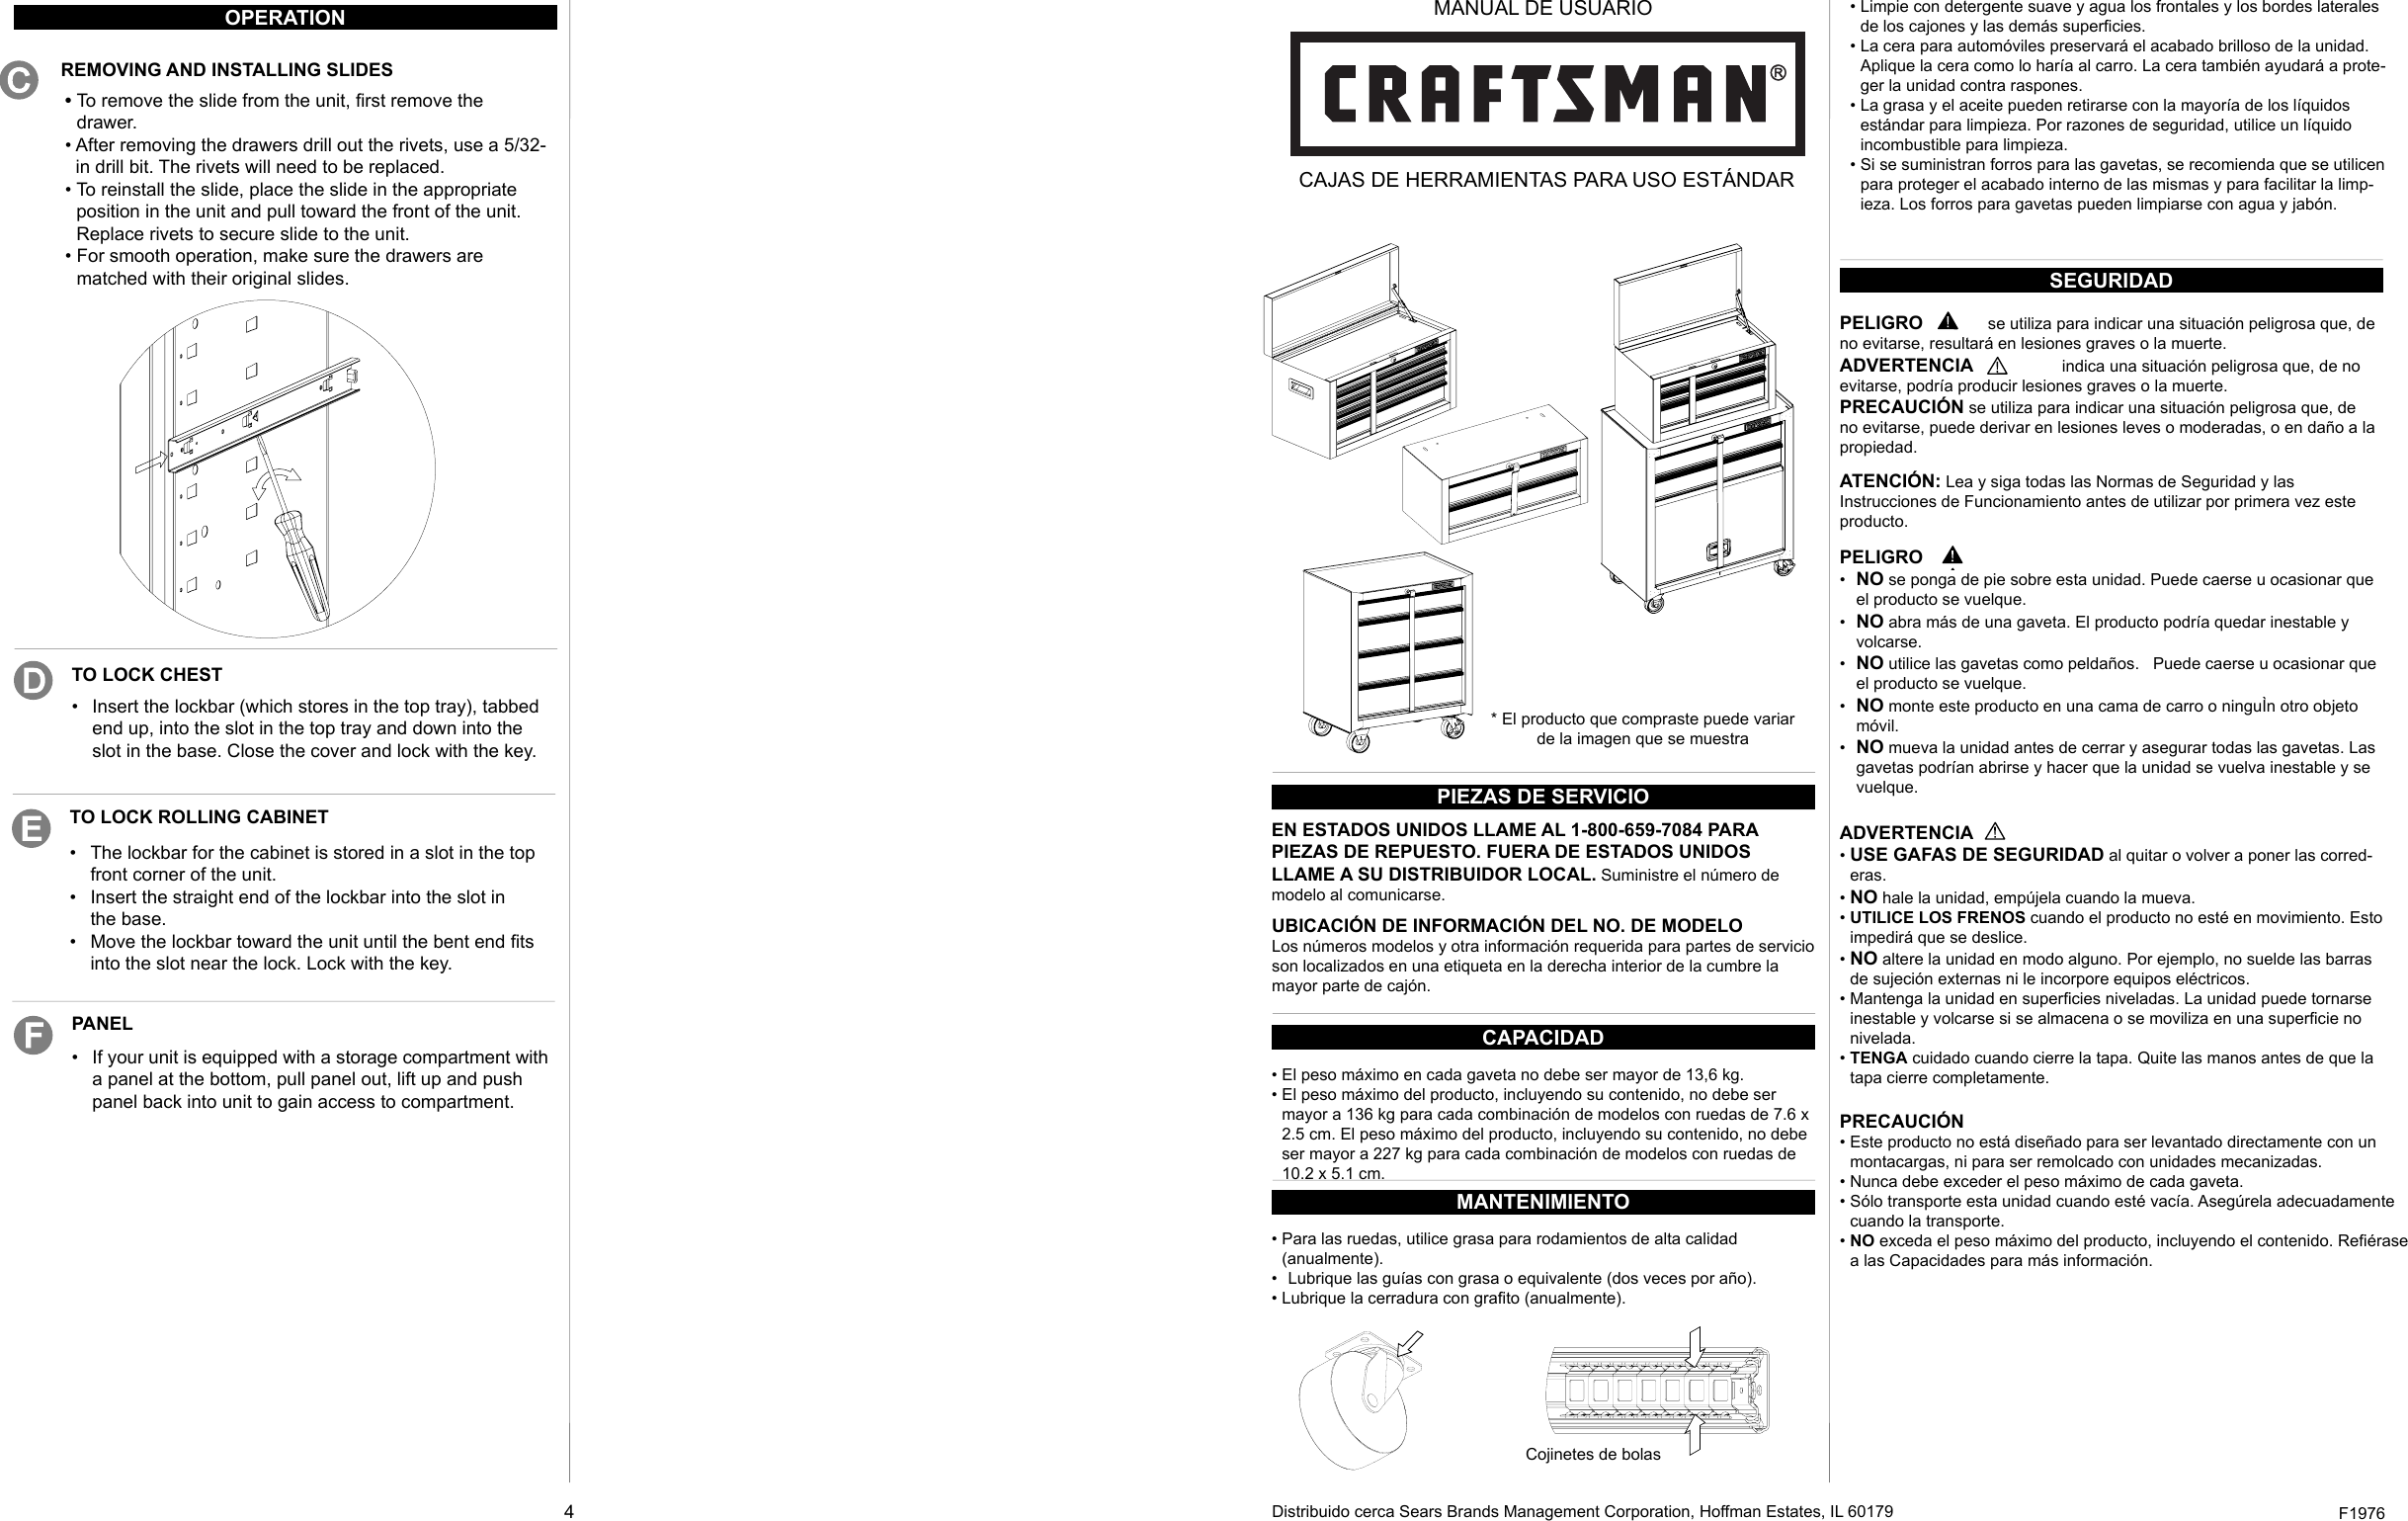 Page 3 of 5 - Craftsman Craftsman-26-In-Wide-3-Drawer-Standard-Duty-Ball-Bearing-Rolling-Cabinet-Red-Use-And-Care-Manual-  Craftsman-26-in-wide-3-drawer-standard-duty-ball-bearing-rolling-cabinet-red-use-and-care-manual